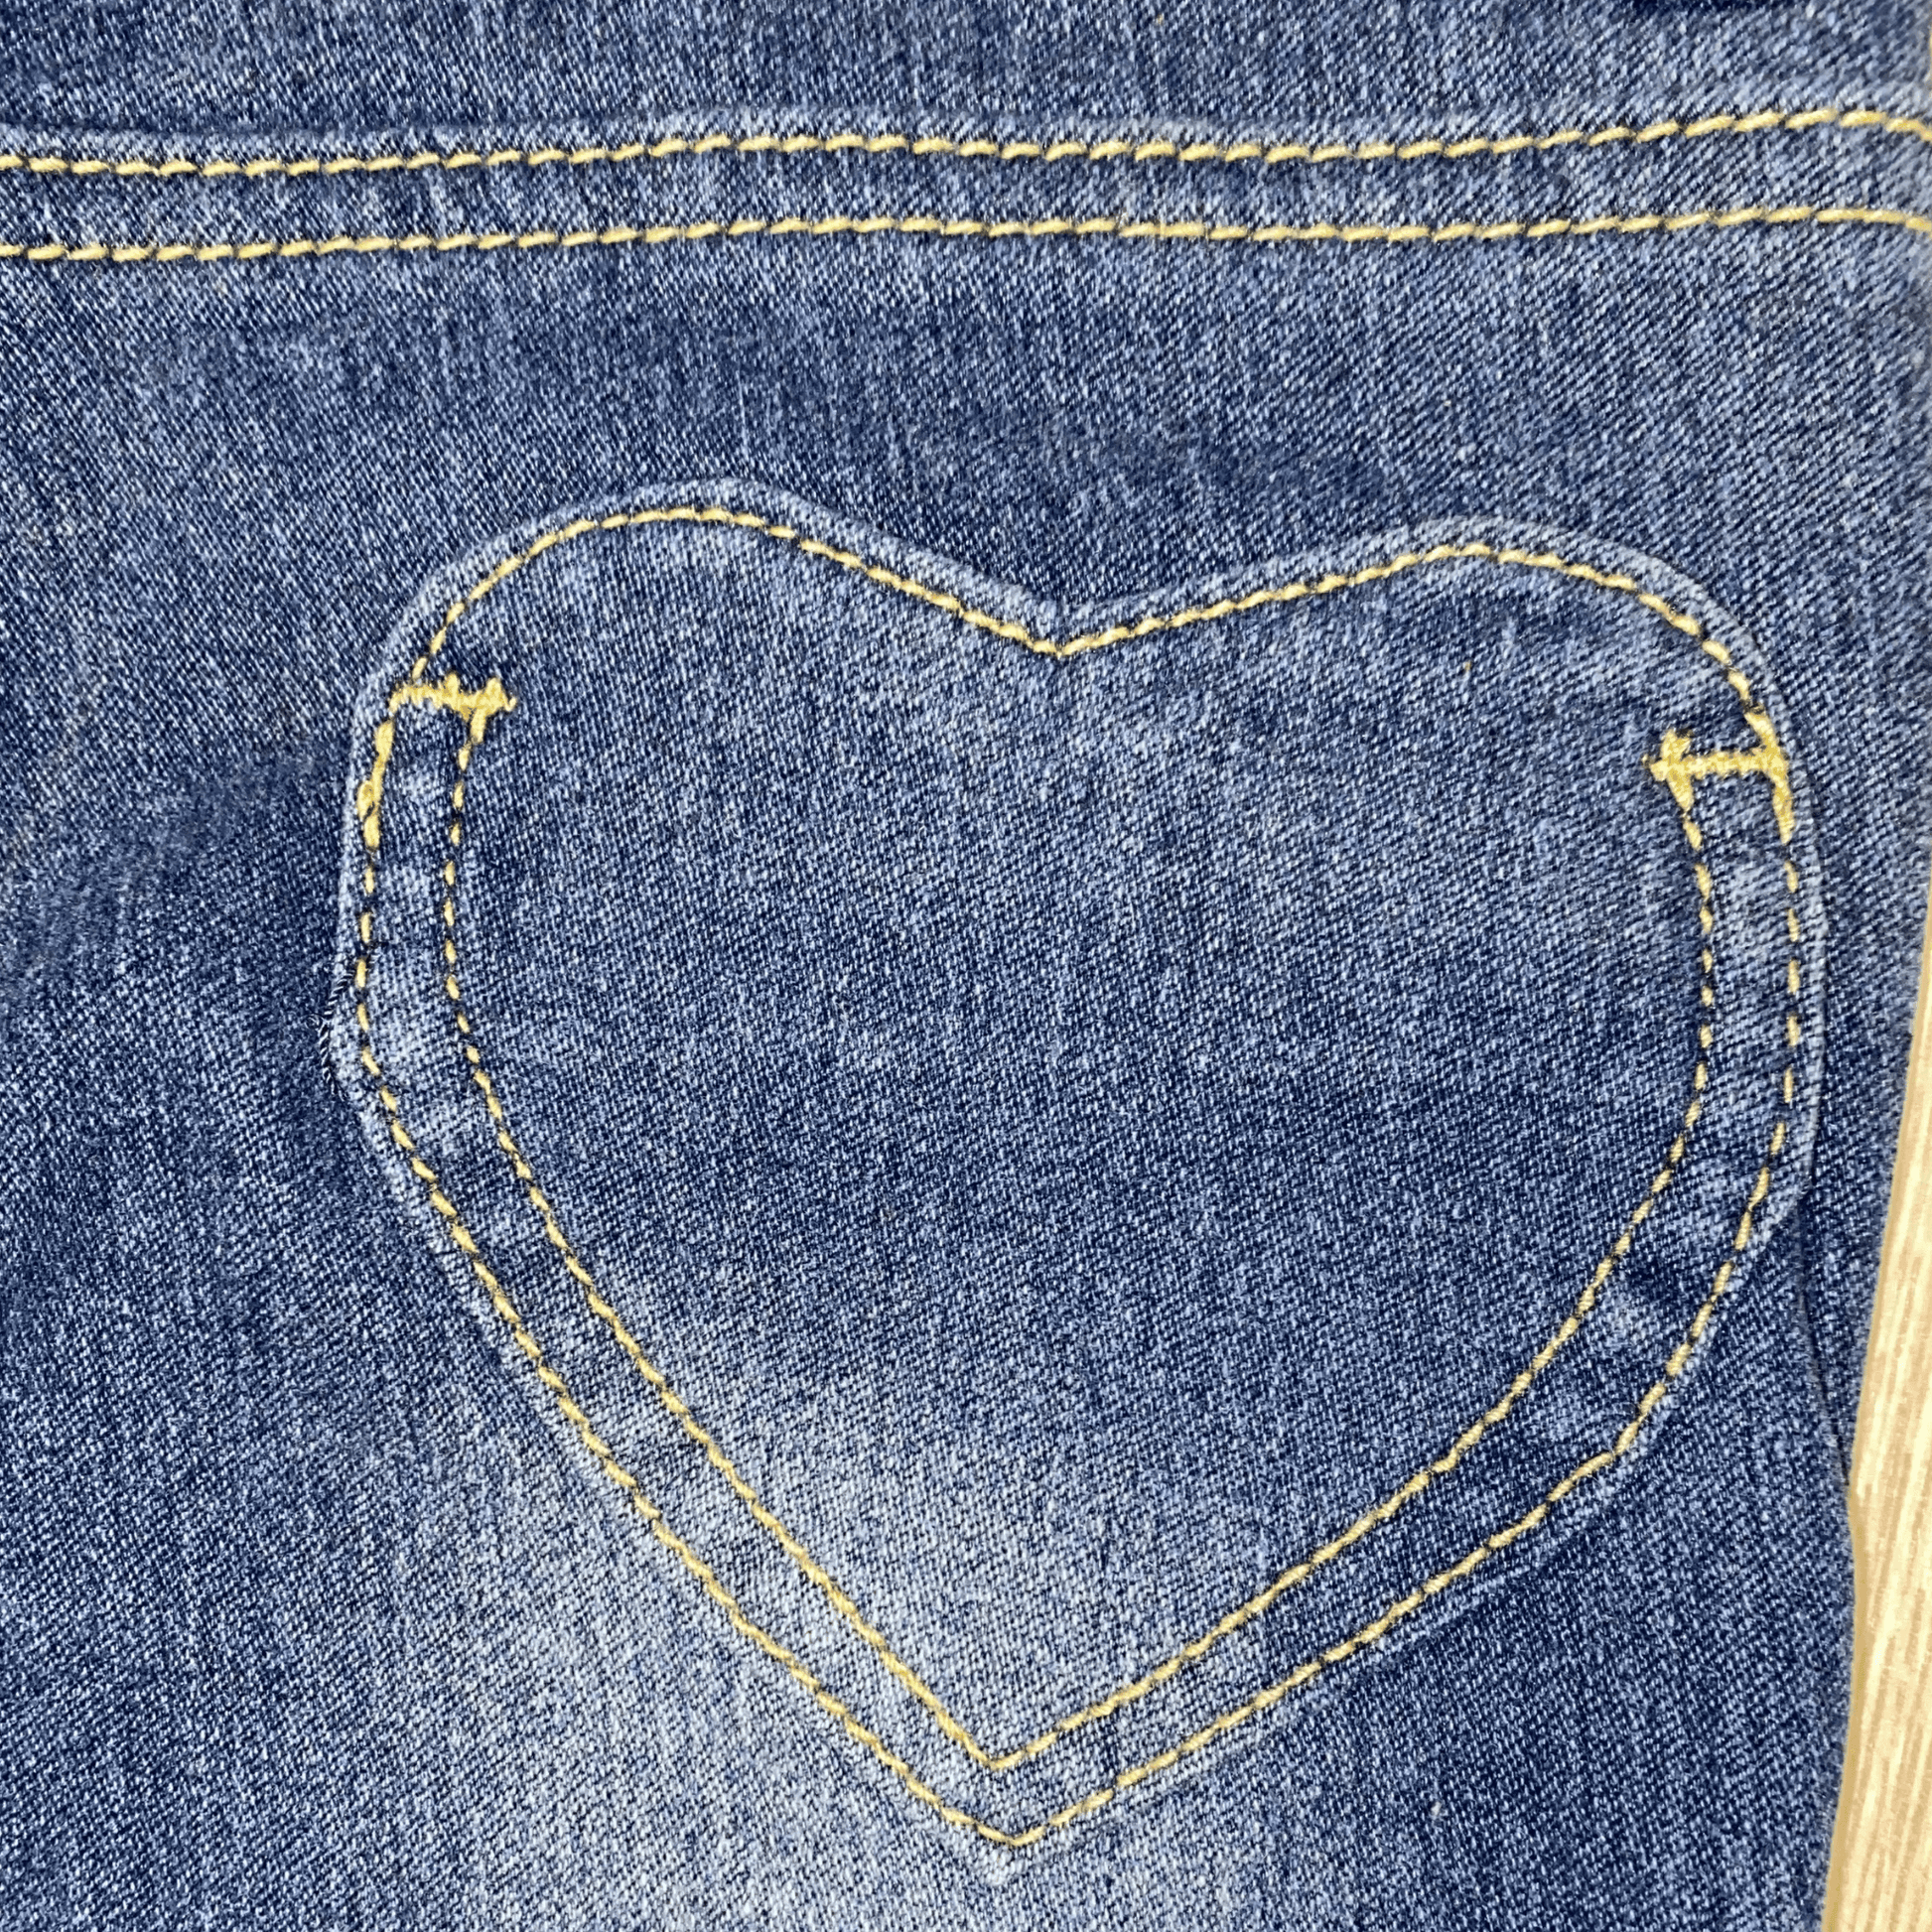 The heart-shaped back pockets of our distressed jeans.